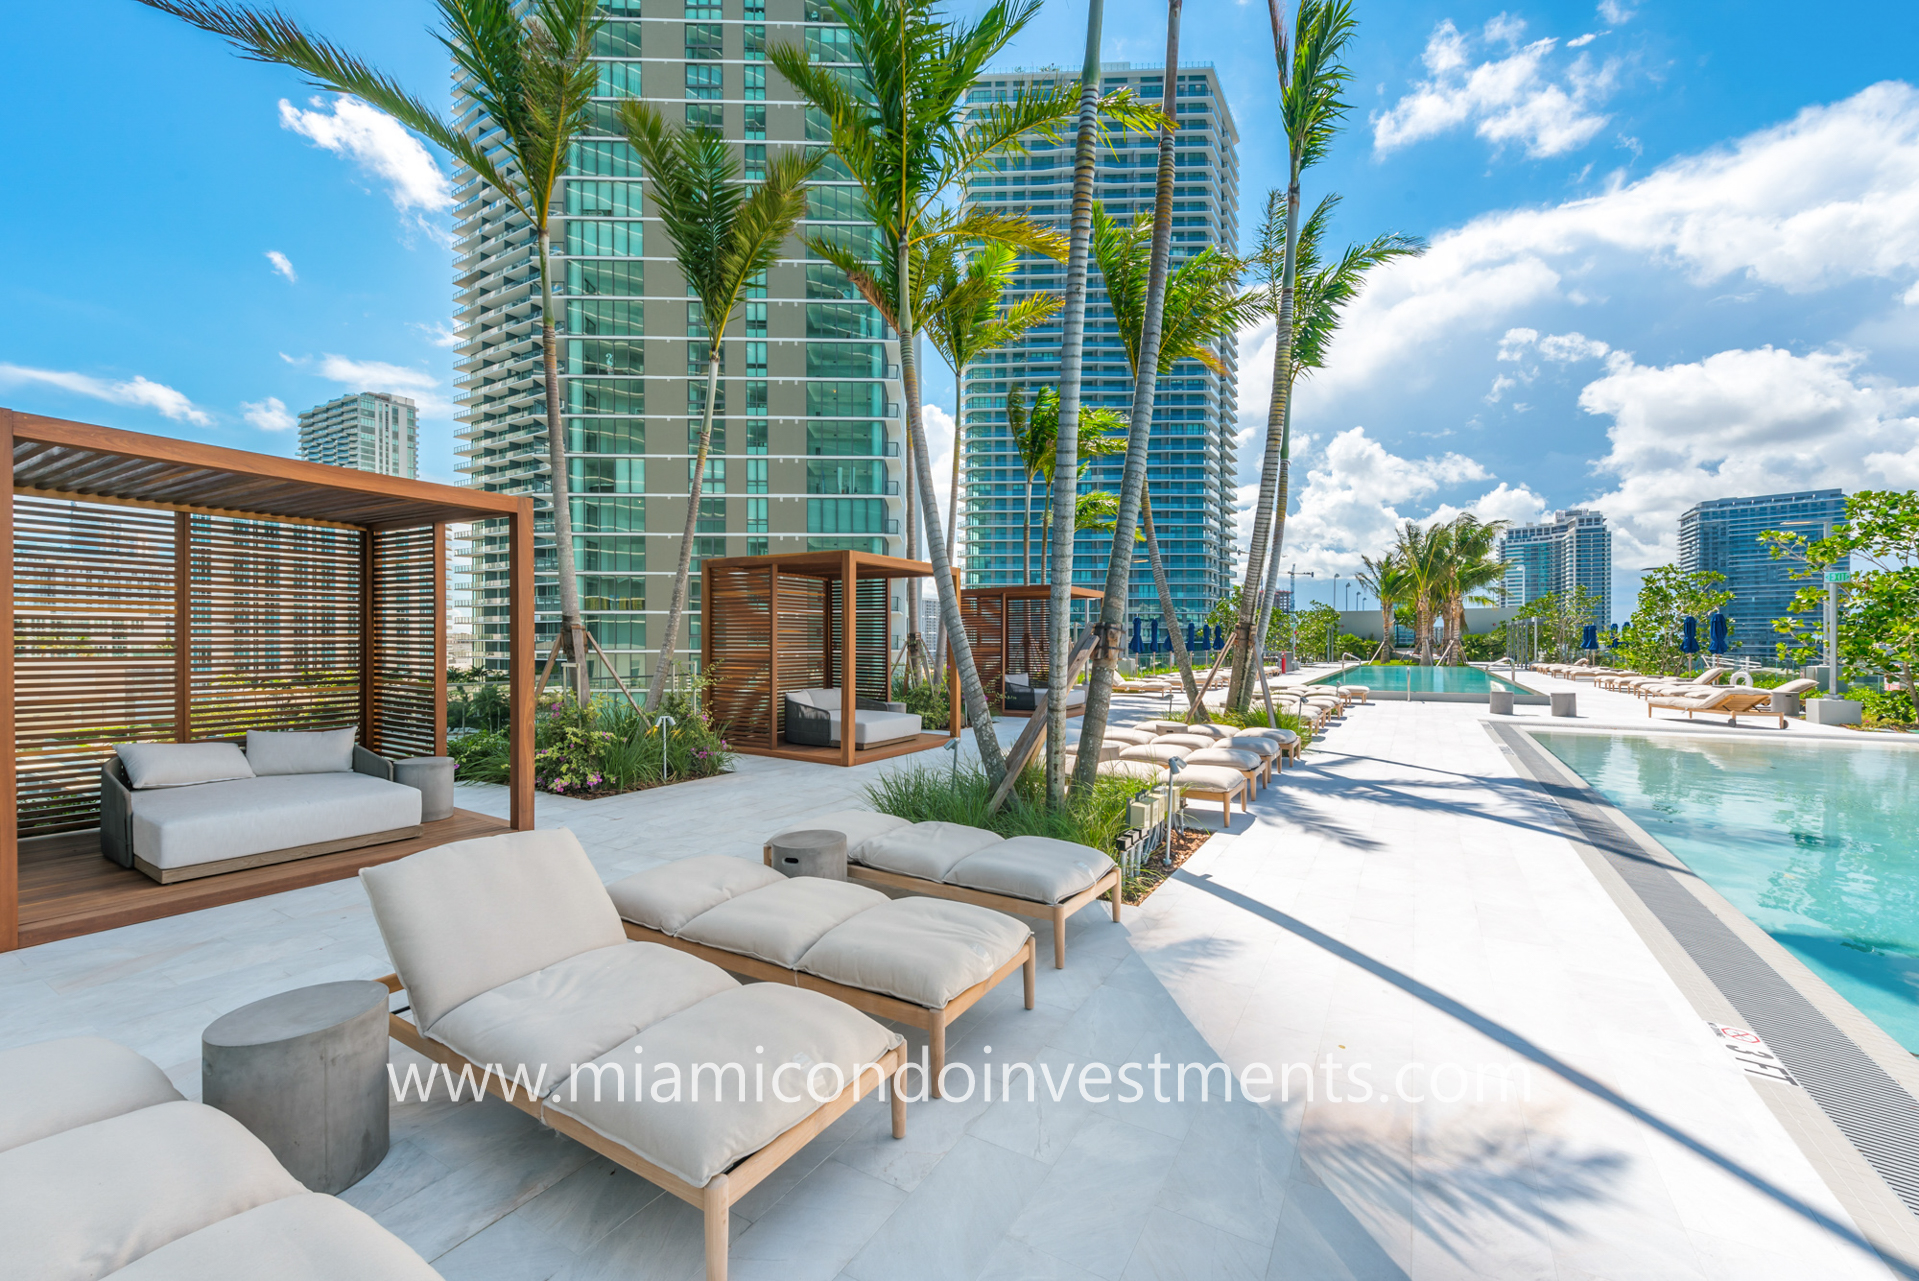 pool deck with cabanas